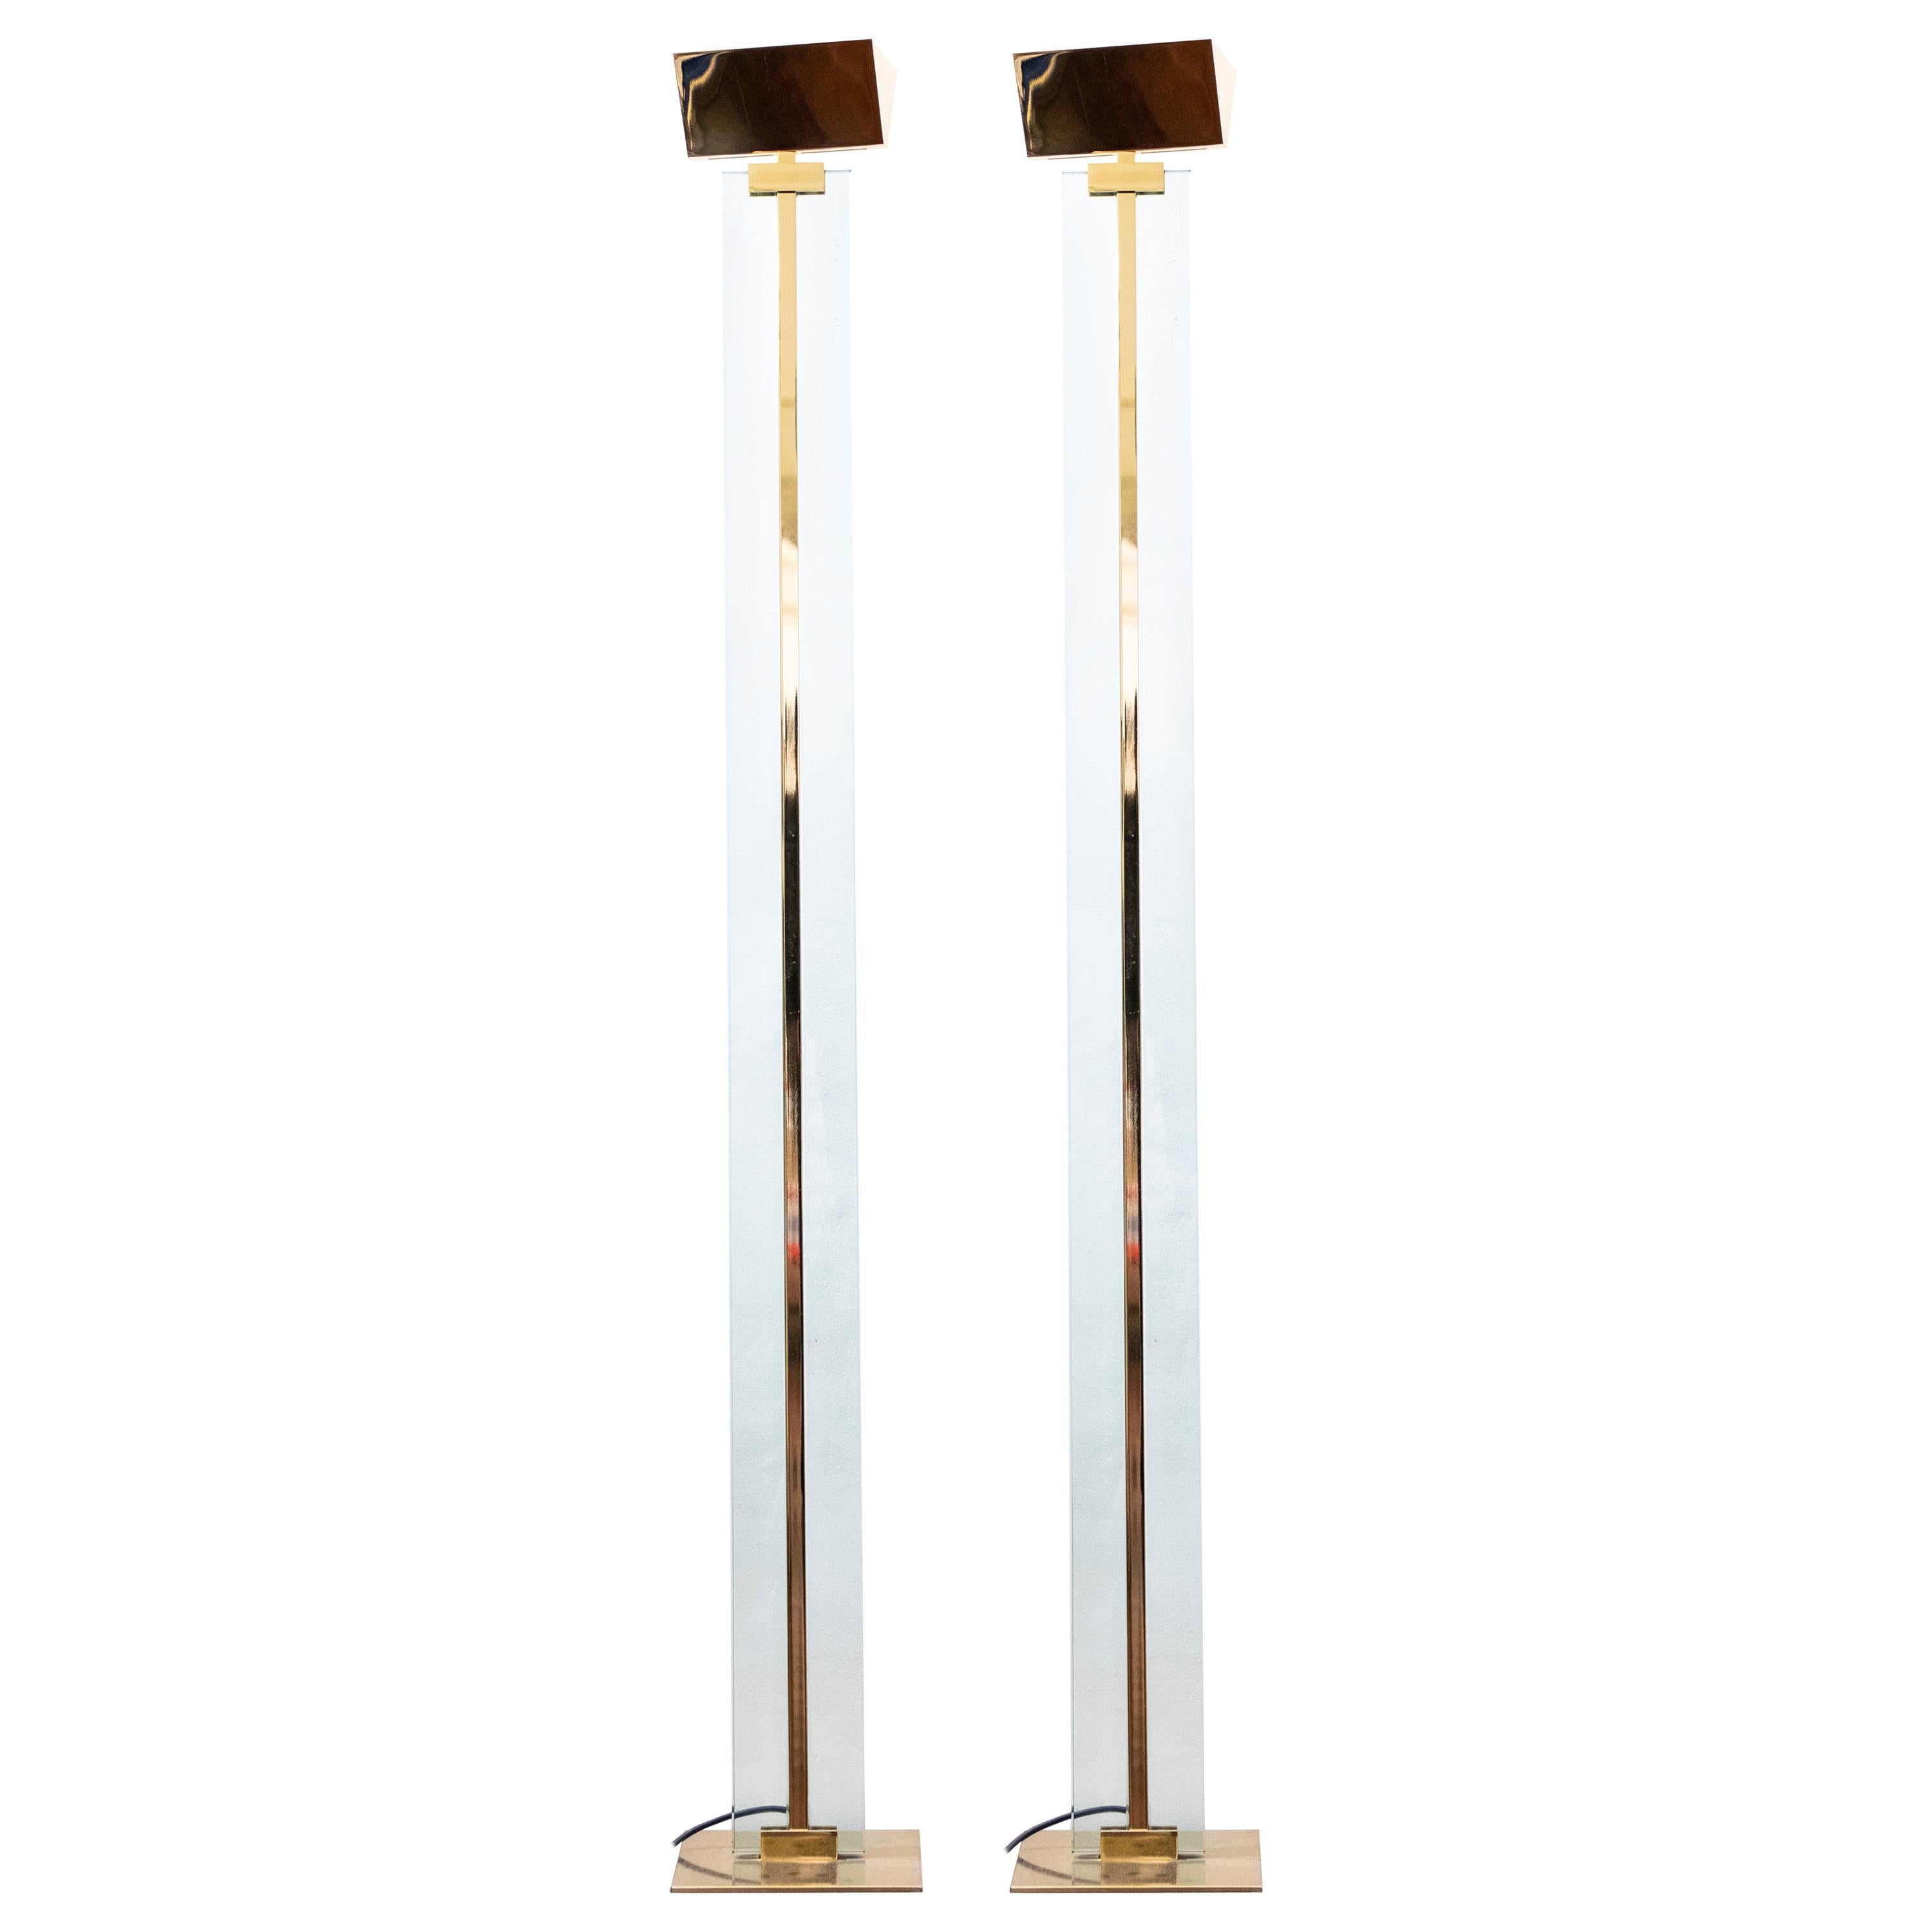 Vintage Pair of Floor Lamps by Gianfranco Frattini for Relco Design, 1970s